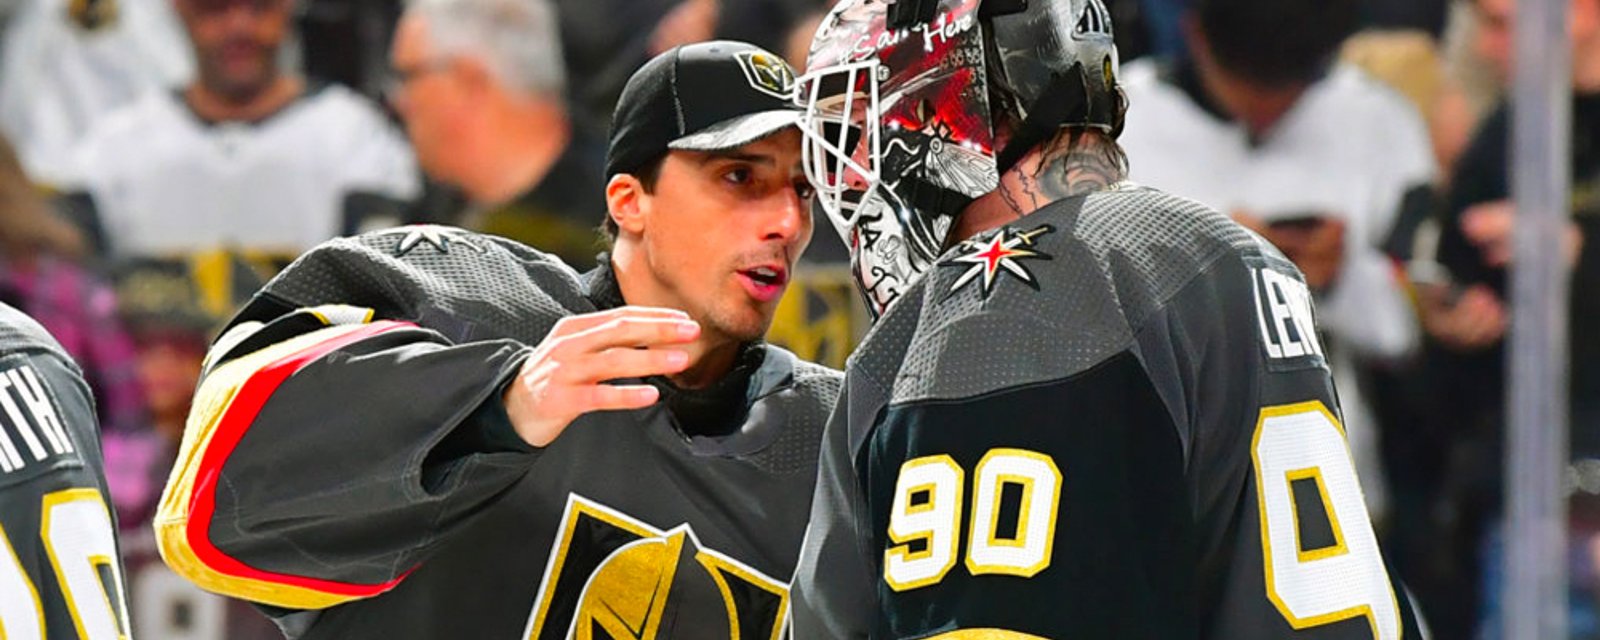 Fleury addresses rumors: “I want to stay in Vegas... I wanted to end my career here.”